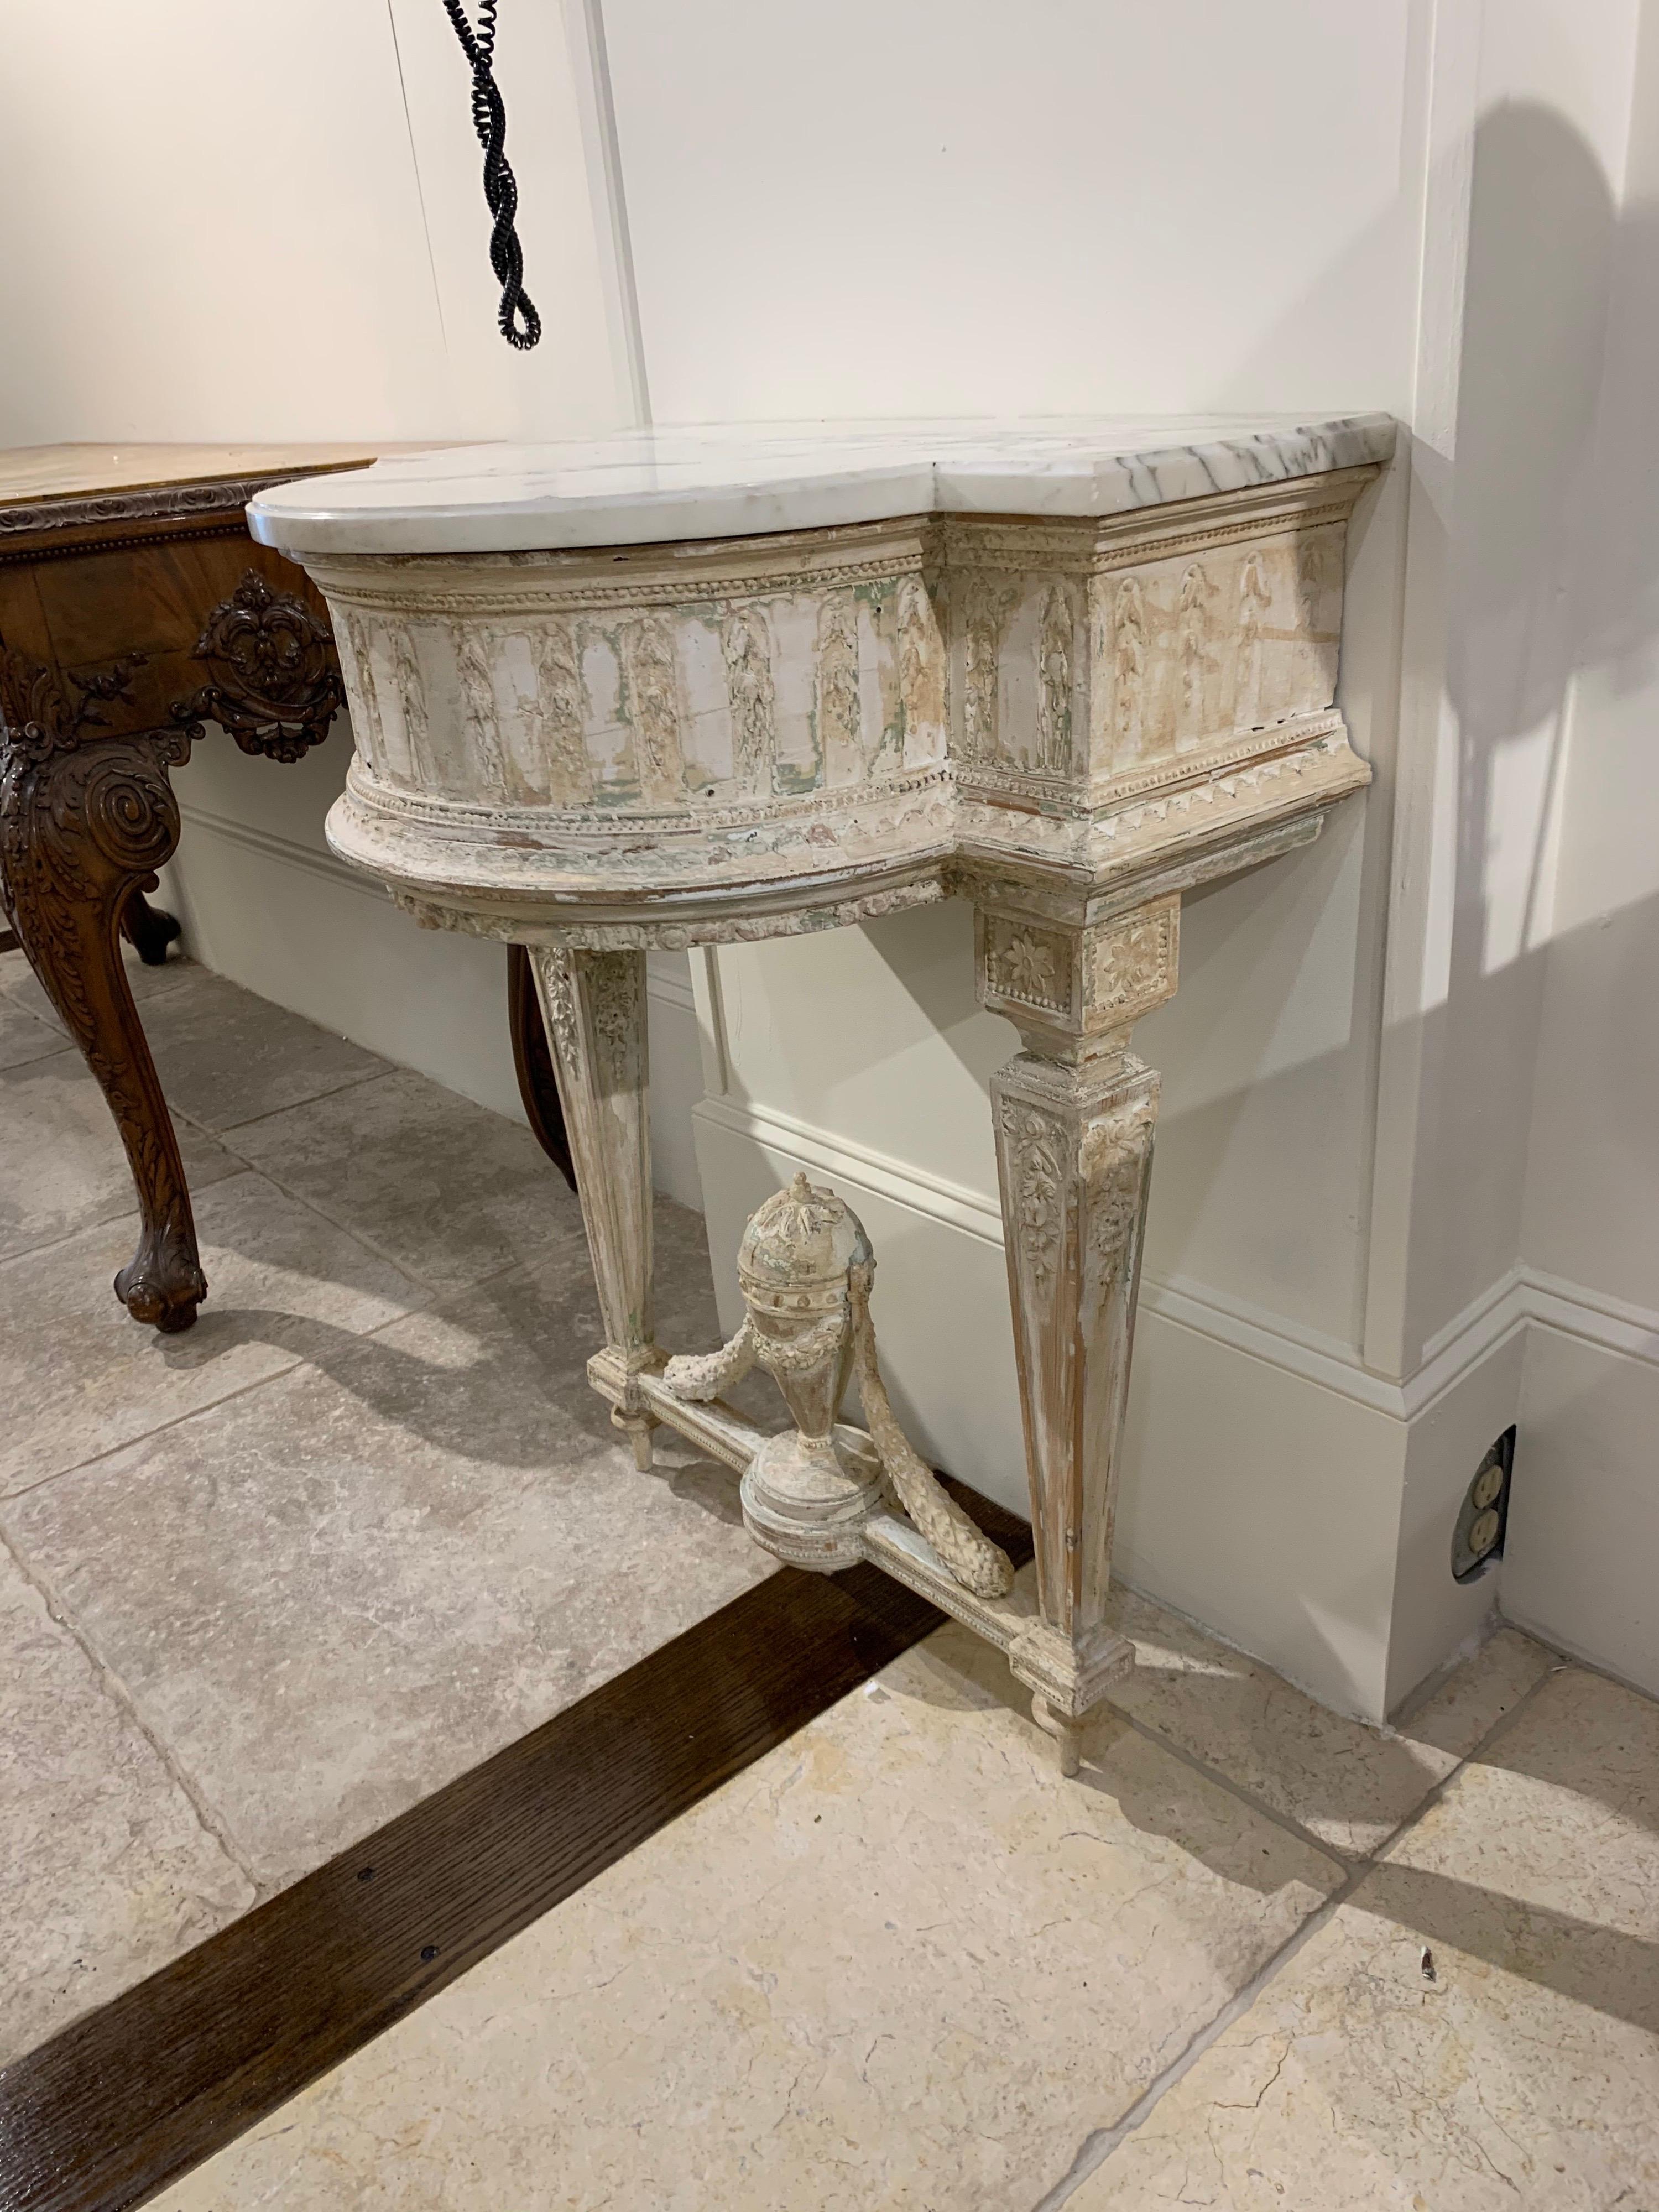 Superb 19th century French Louis XVI carved and painted console with Carrara marble top. Carving is exceptional on this piece. Fabulous!!